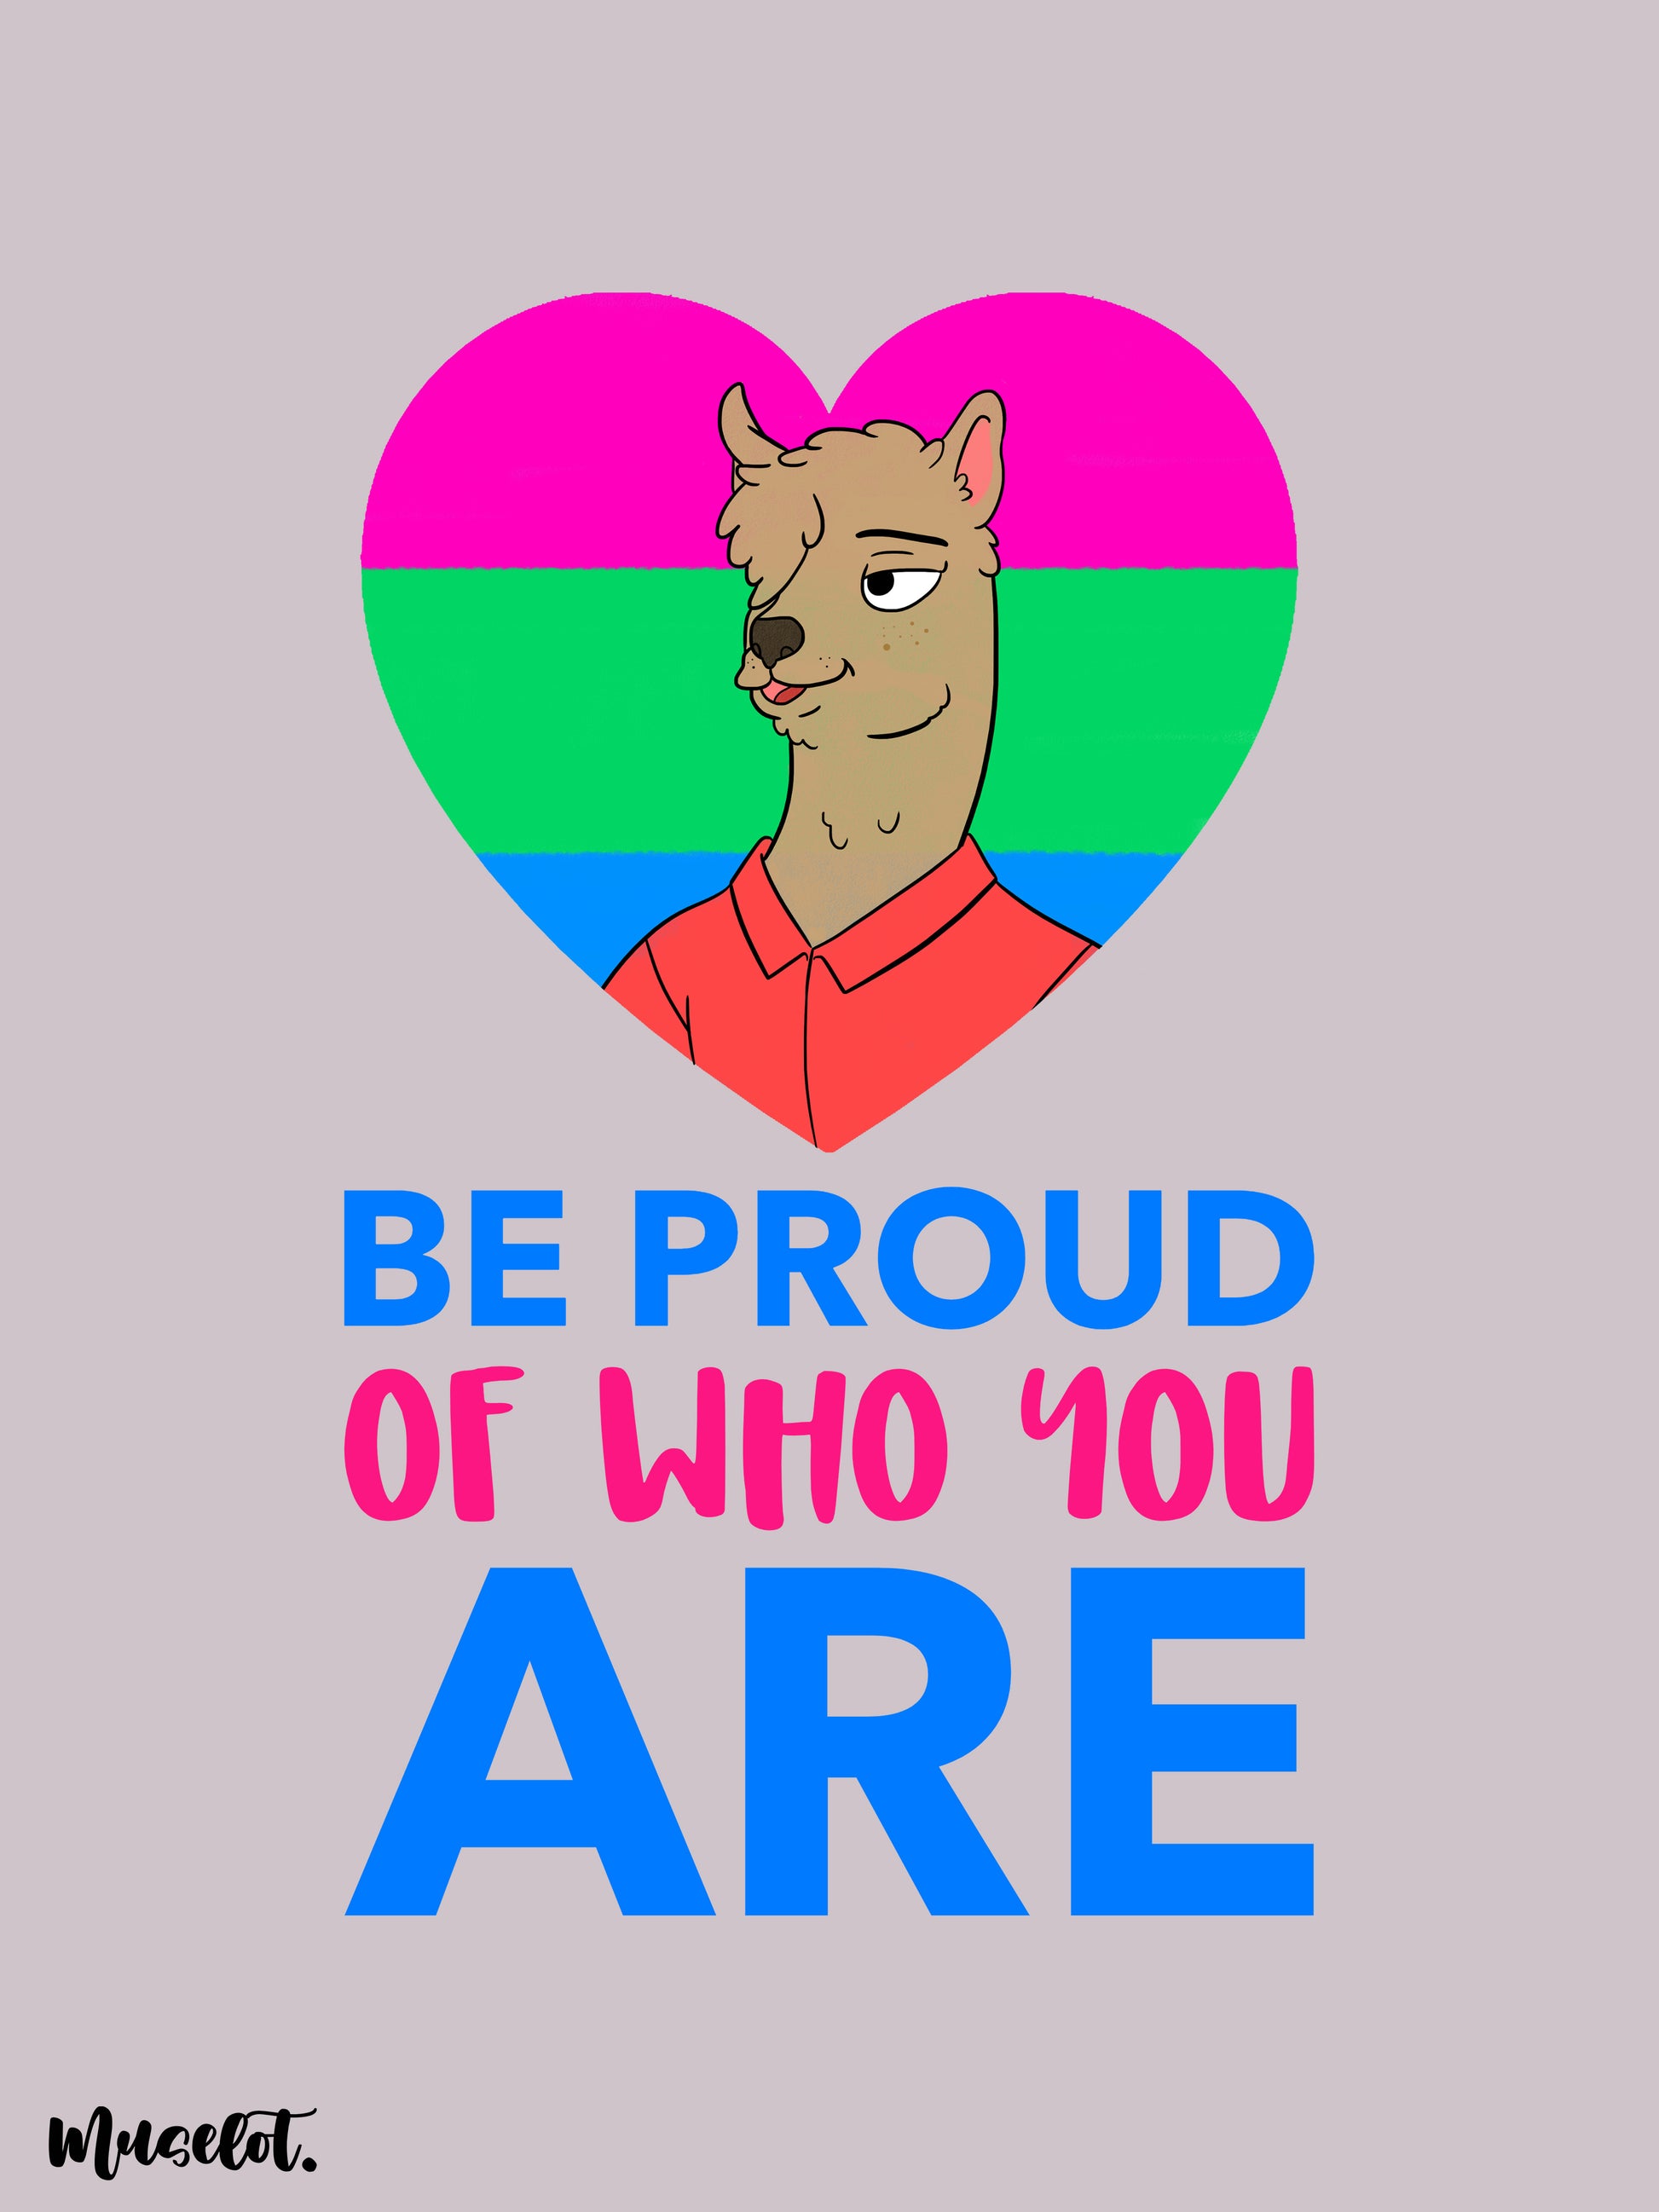 Be proud of who you are printed phone cases for pride community. Available for all phone case brands like iphone, samsung, vivo, oppo, realme, nokia, oneplus, xiaomi, lenovo, moto, etc.